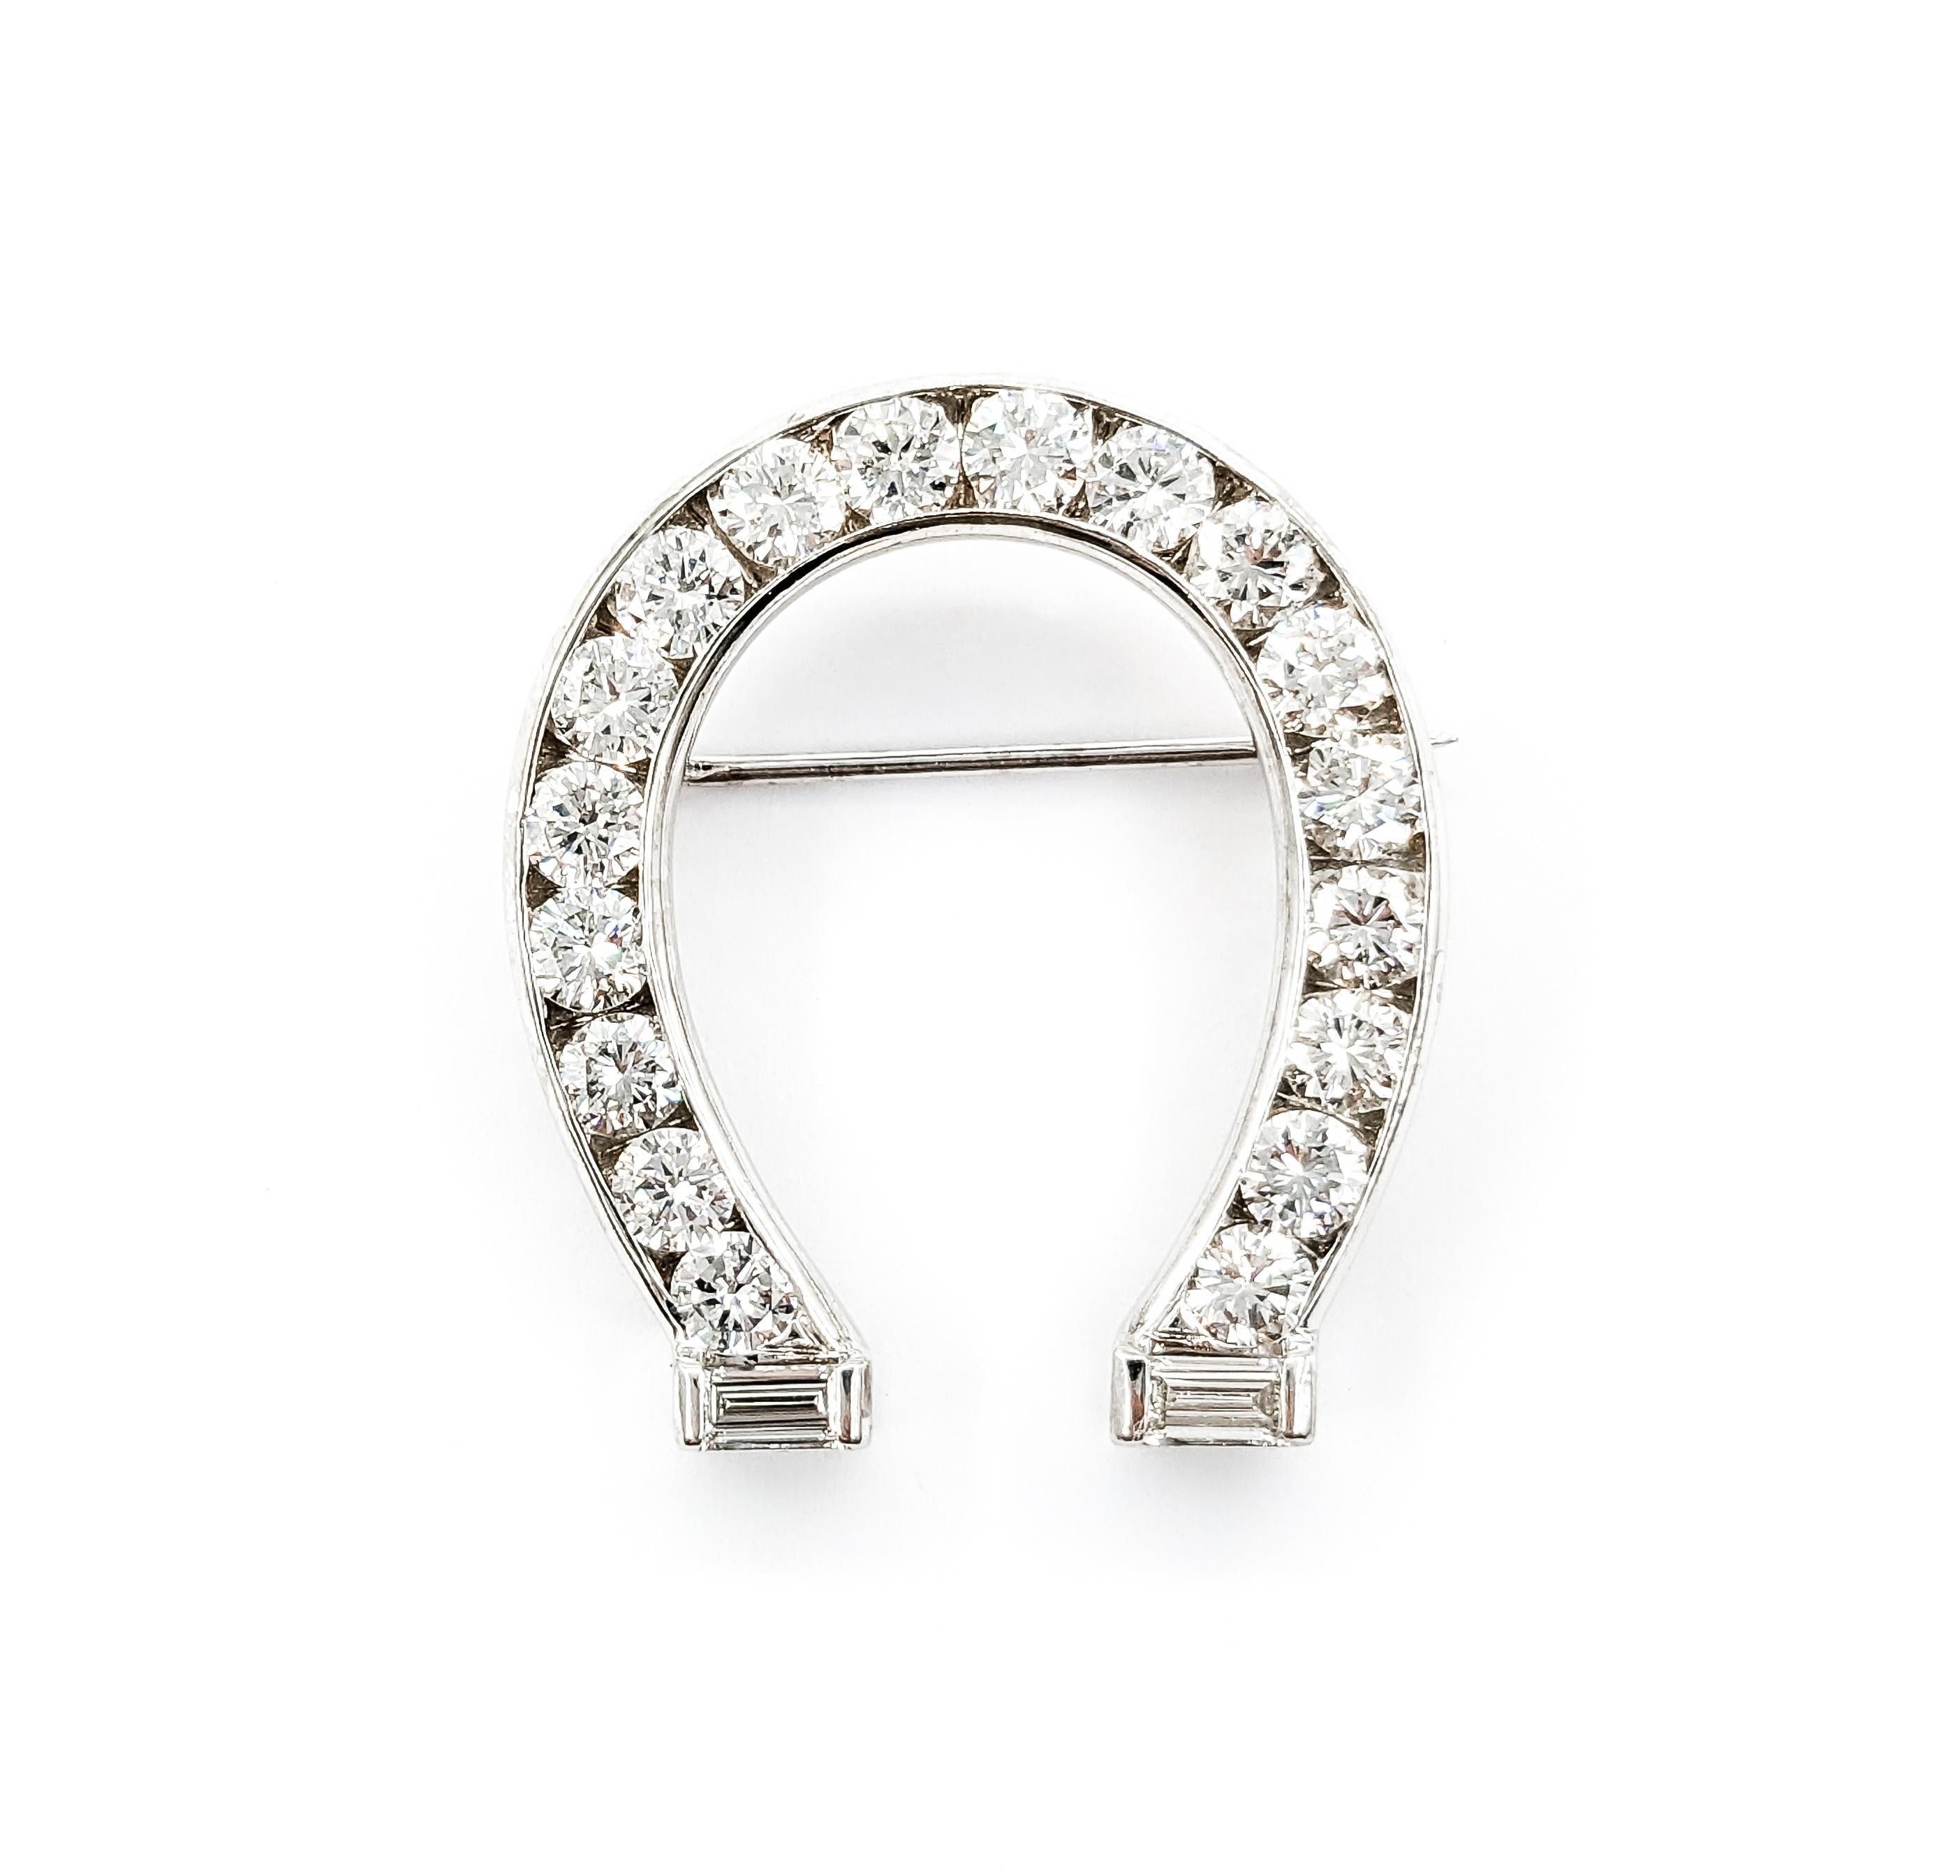 3.ctw Diamond Horseshoe Pendant In White Gold

This stunning Diamond Fashion Brooch, in the shape of a horseshoe, is exquisitely crafted in 14kt white gold. It features an impressive 3.00ctw of diamonds, meticulously channel-set in a blend of round